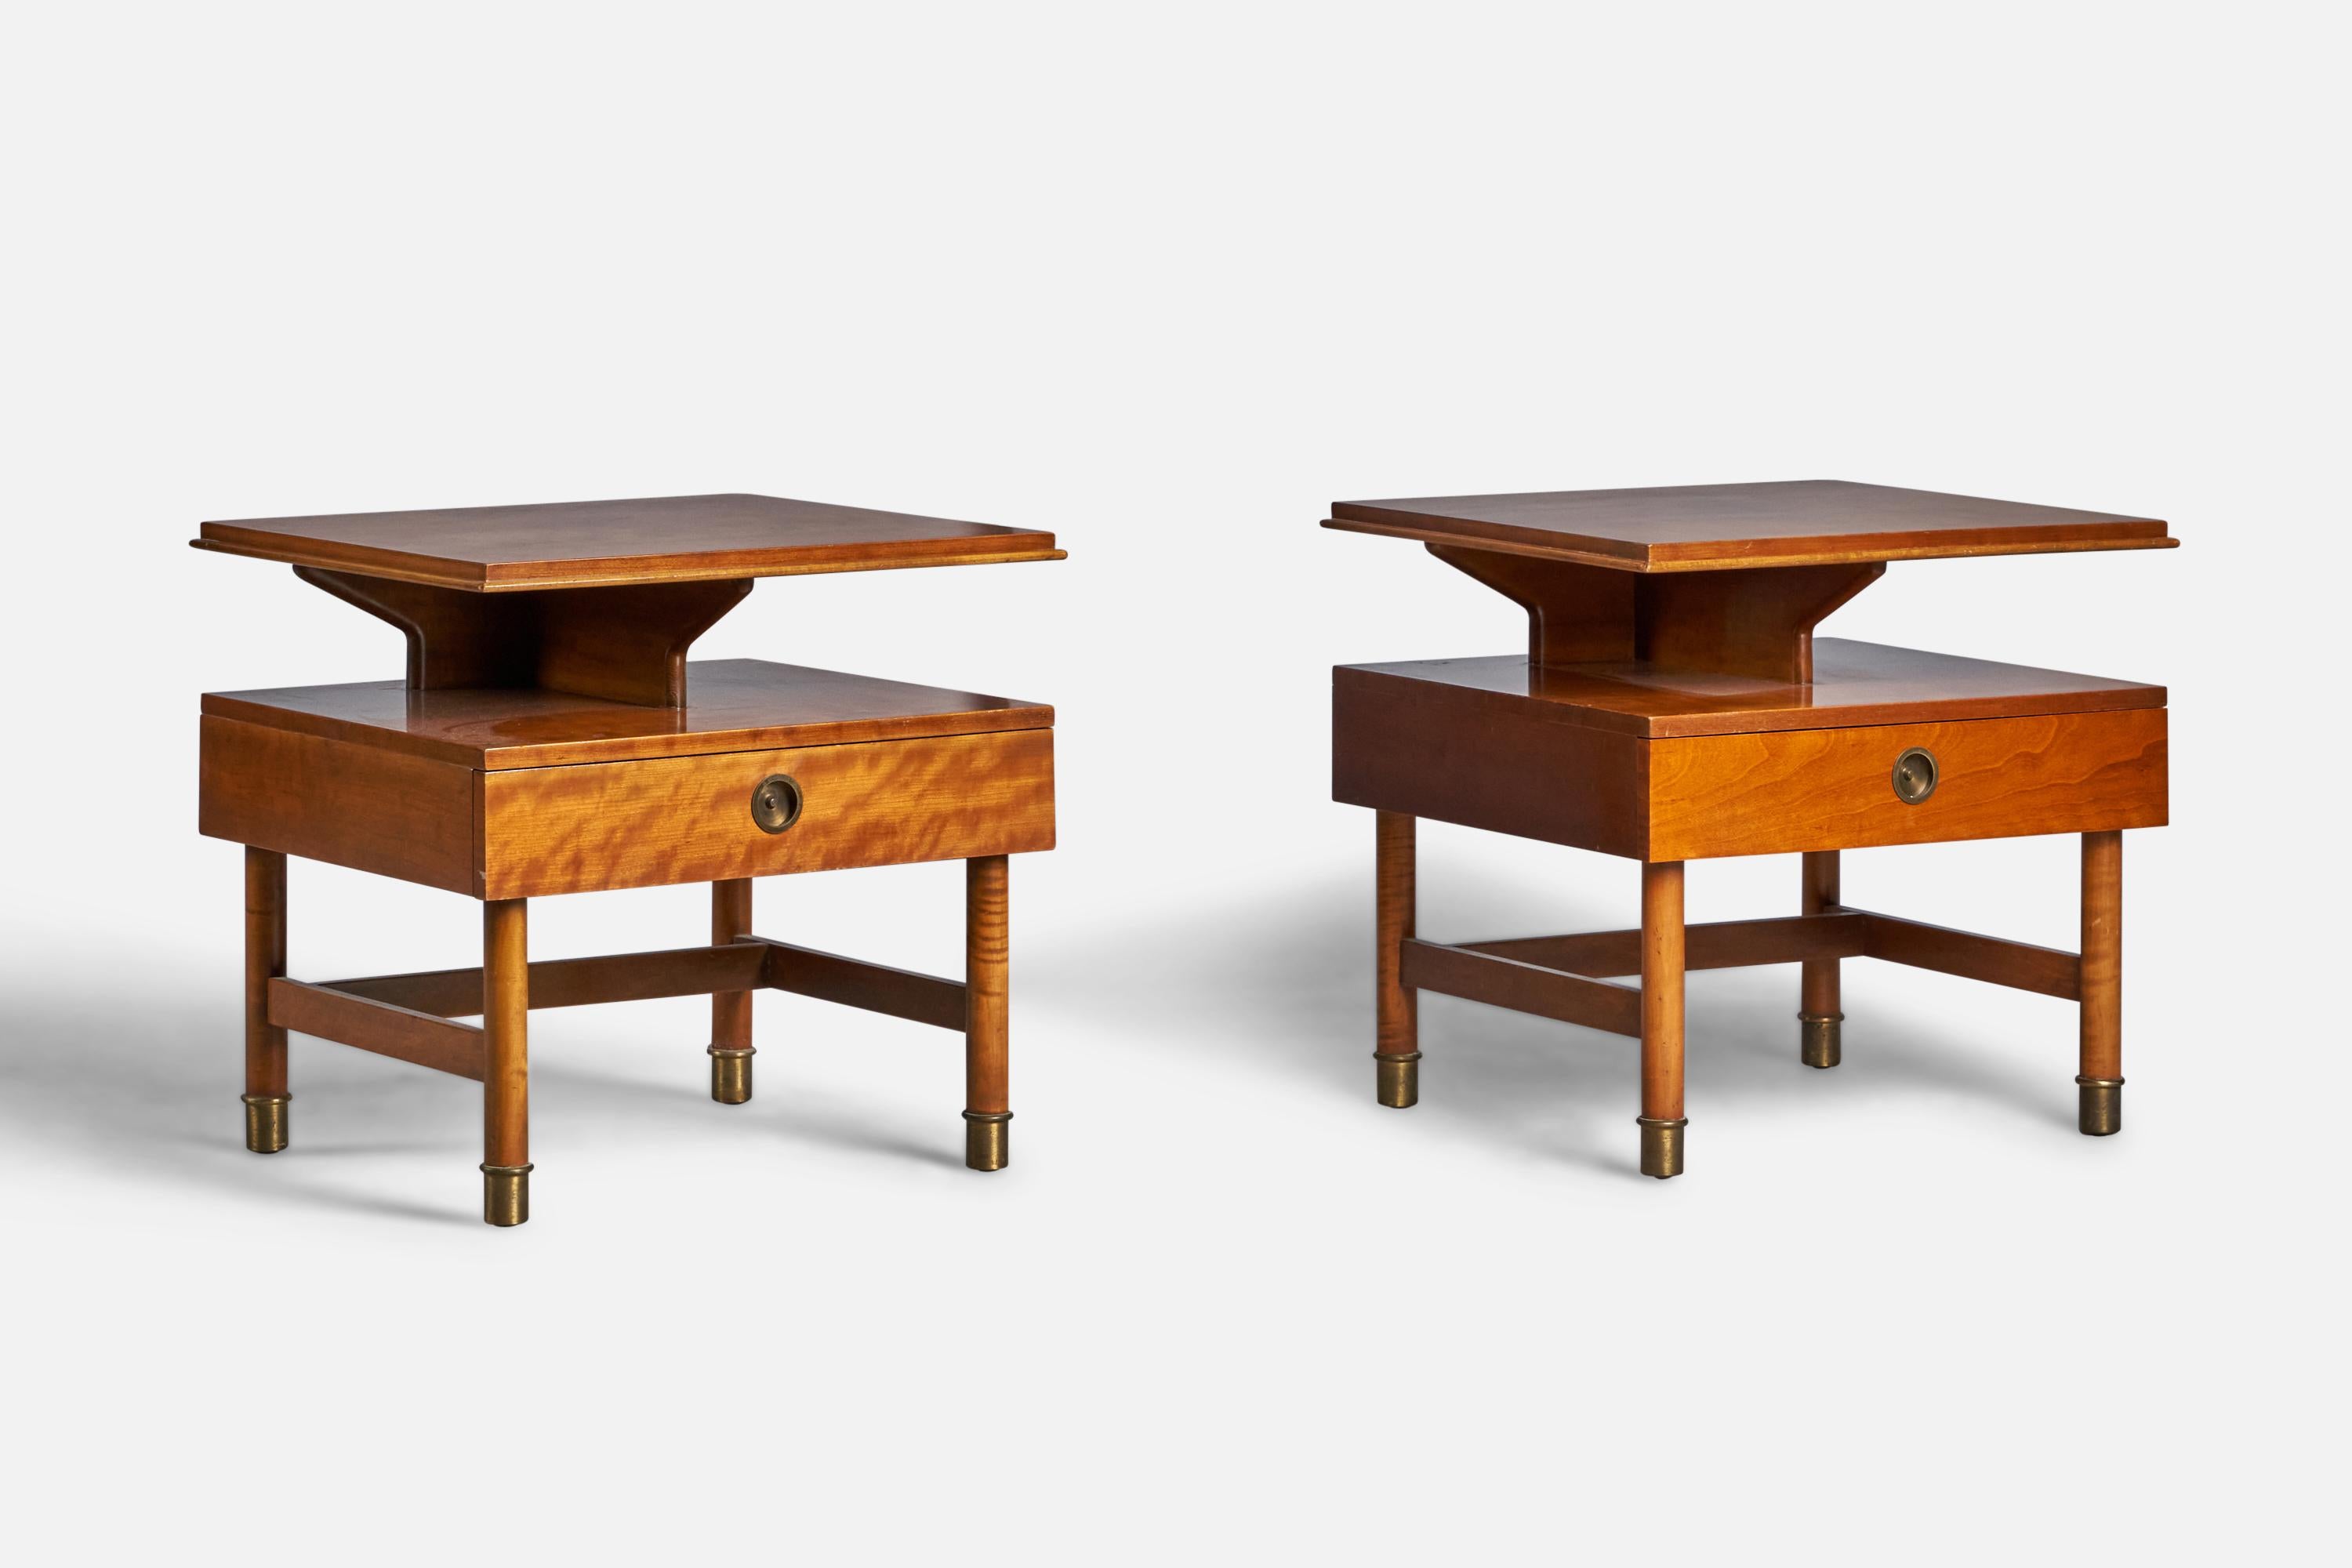 A pair of mahogany, maple and brass nightstands or bedside tables produced by Johnson Furniture Company, USA, c. 1950s. Design attributed to Renzo Rutili.